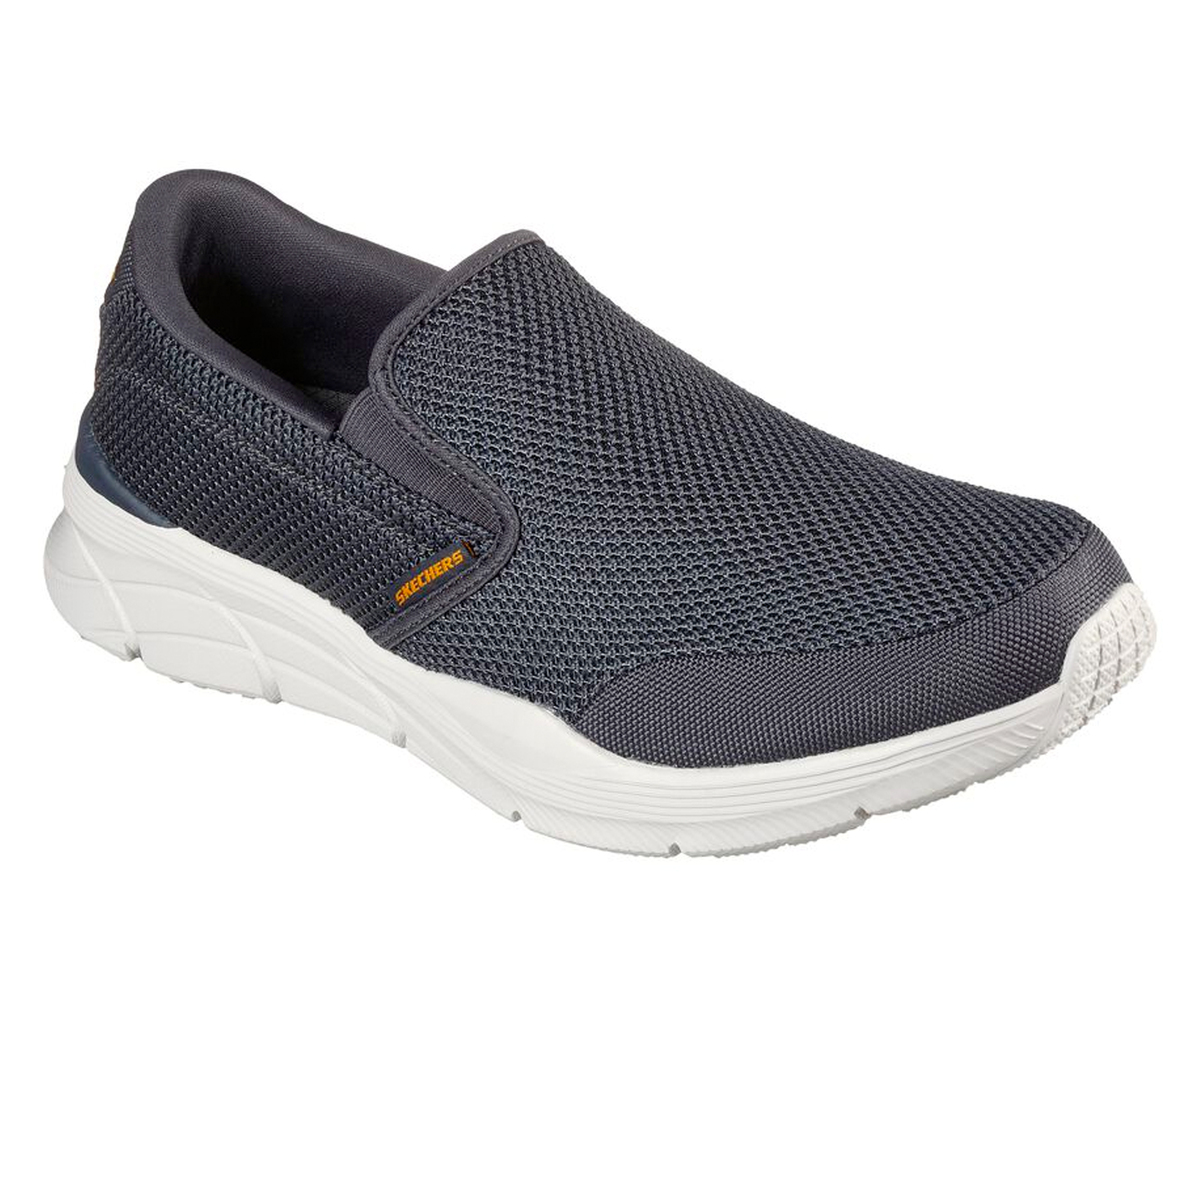 Skechers Mens Sport Shoes 232018 Char, 41.5 Online at Best Price ...